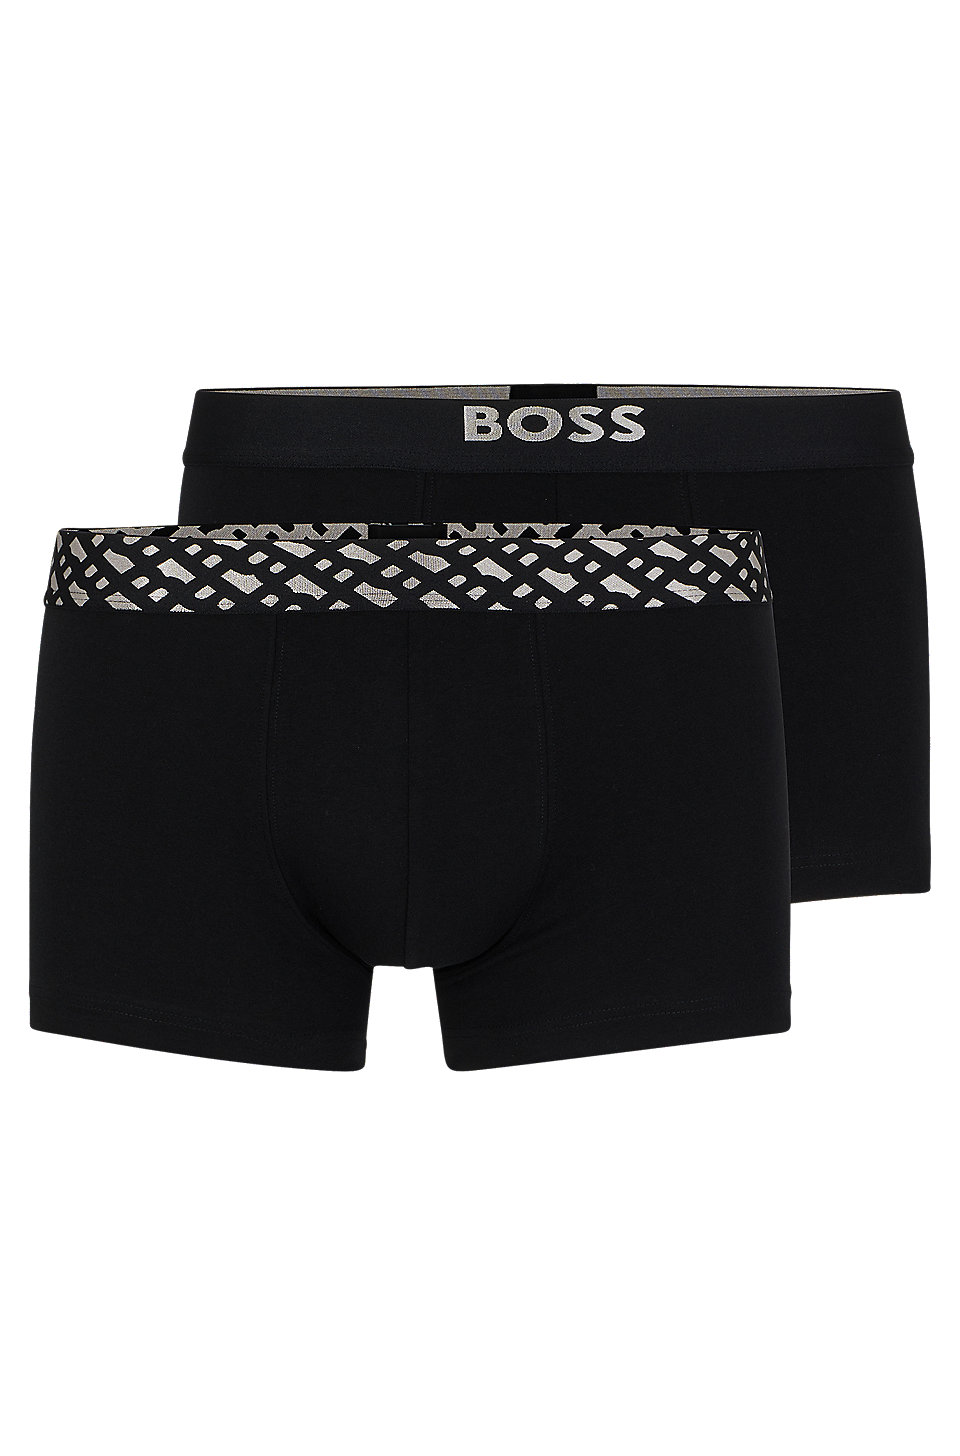 BOSS - Two-pack of stretch-cotton trunks with metallic branding